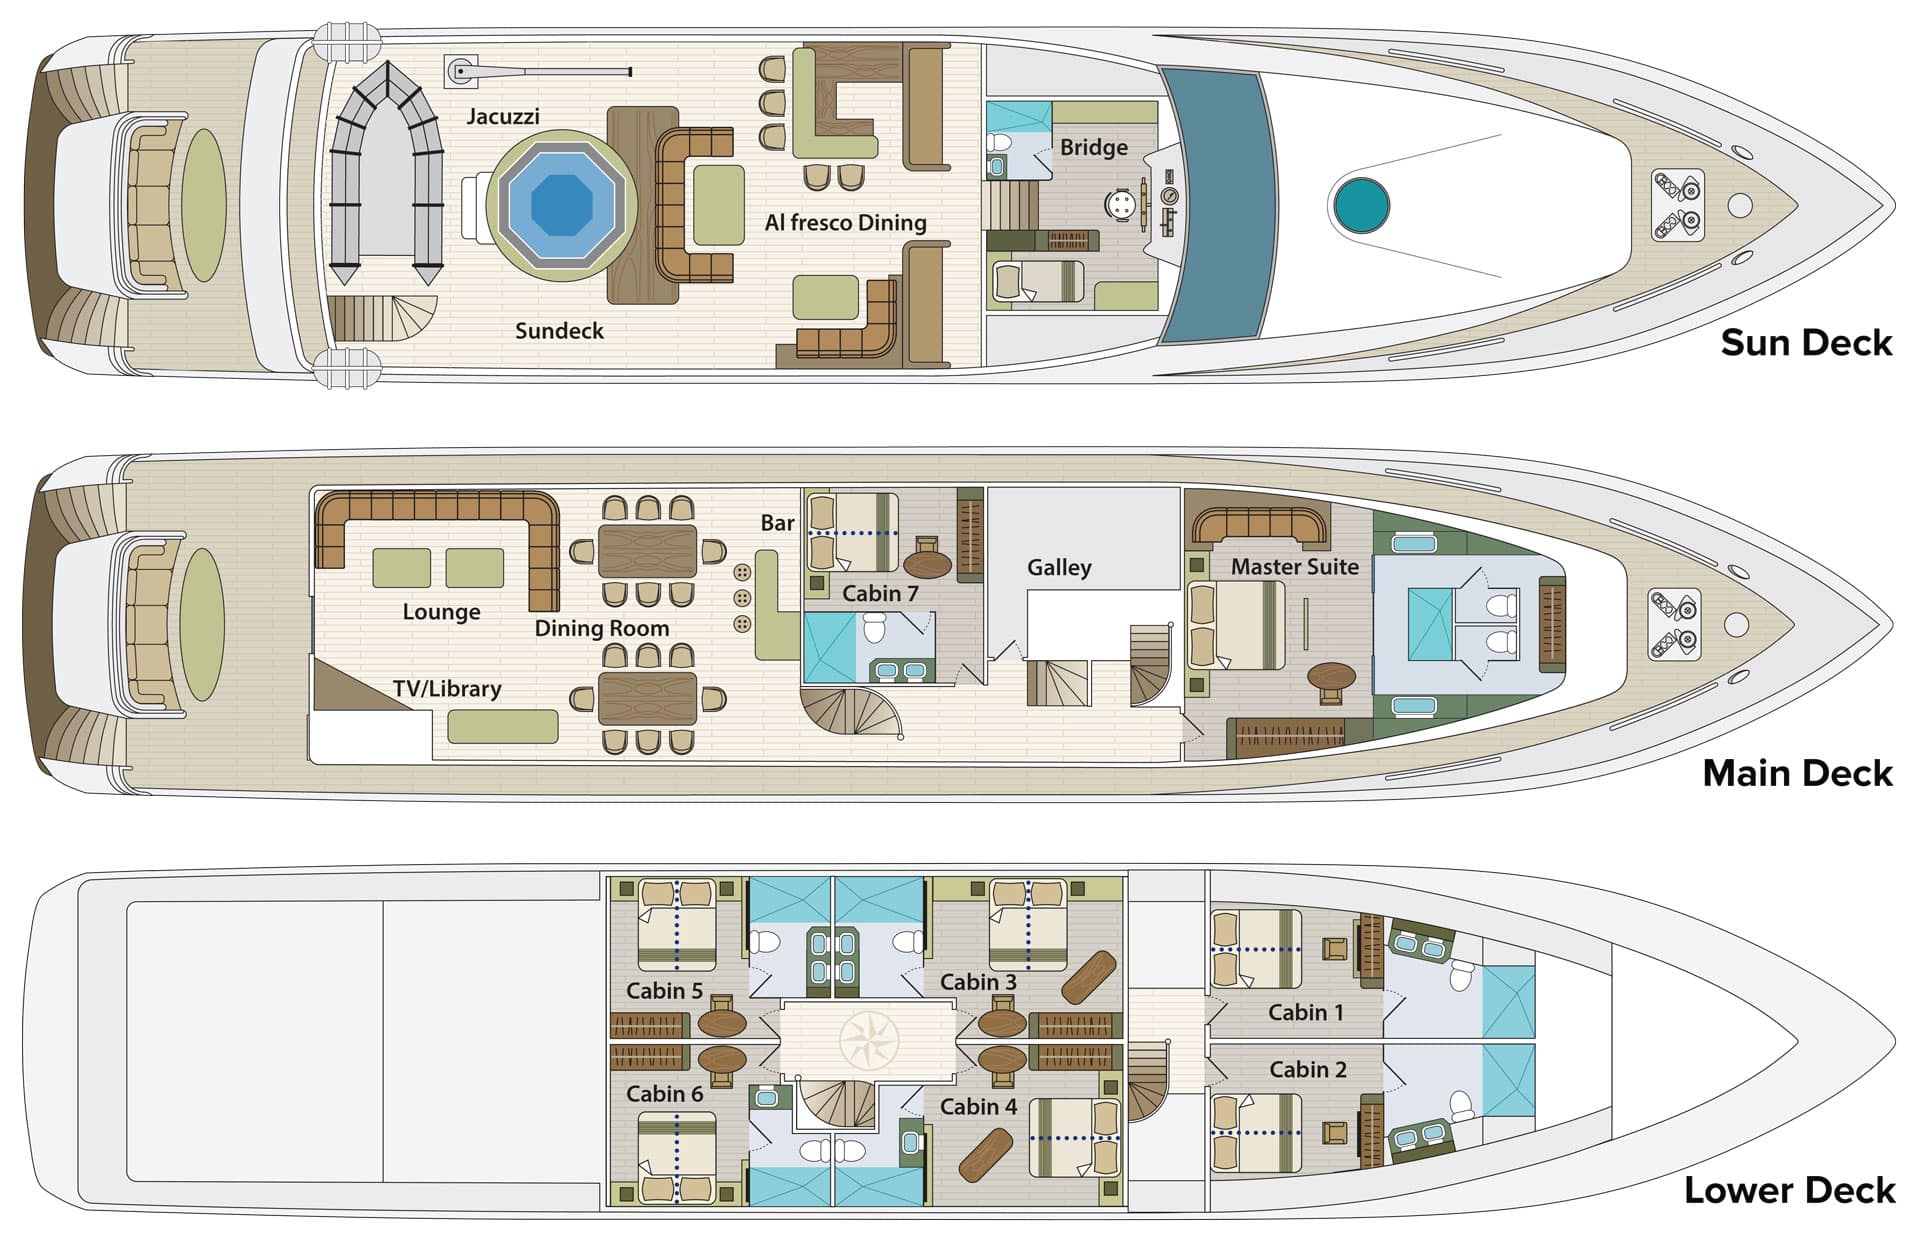 Deck plan of Grand Majestic Galapagos yacht with 3 decks, 7 staterooms & 1 master suite.